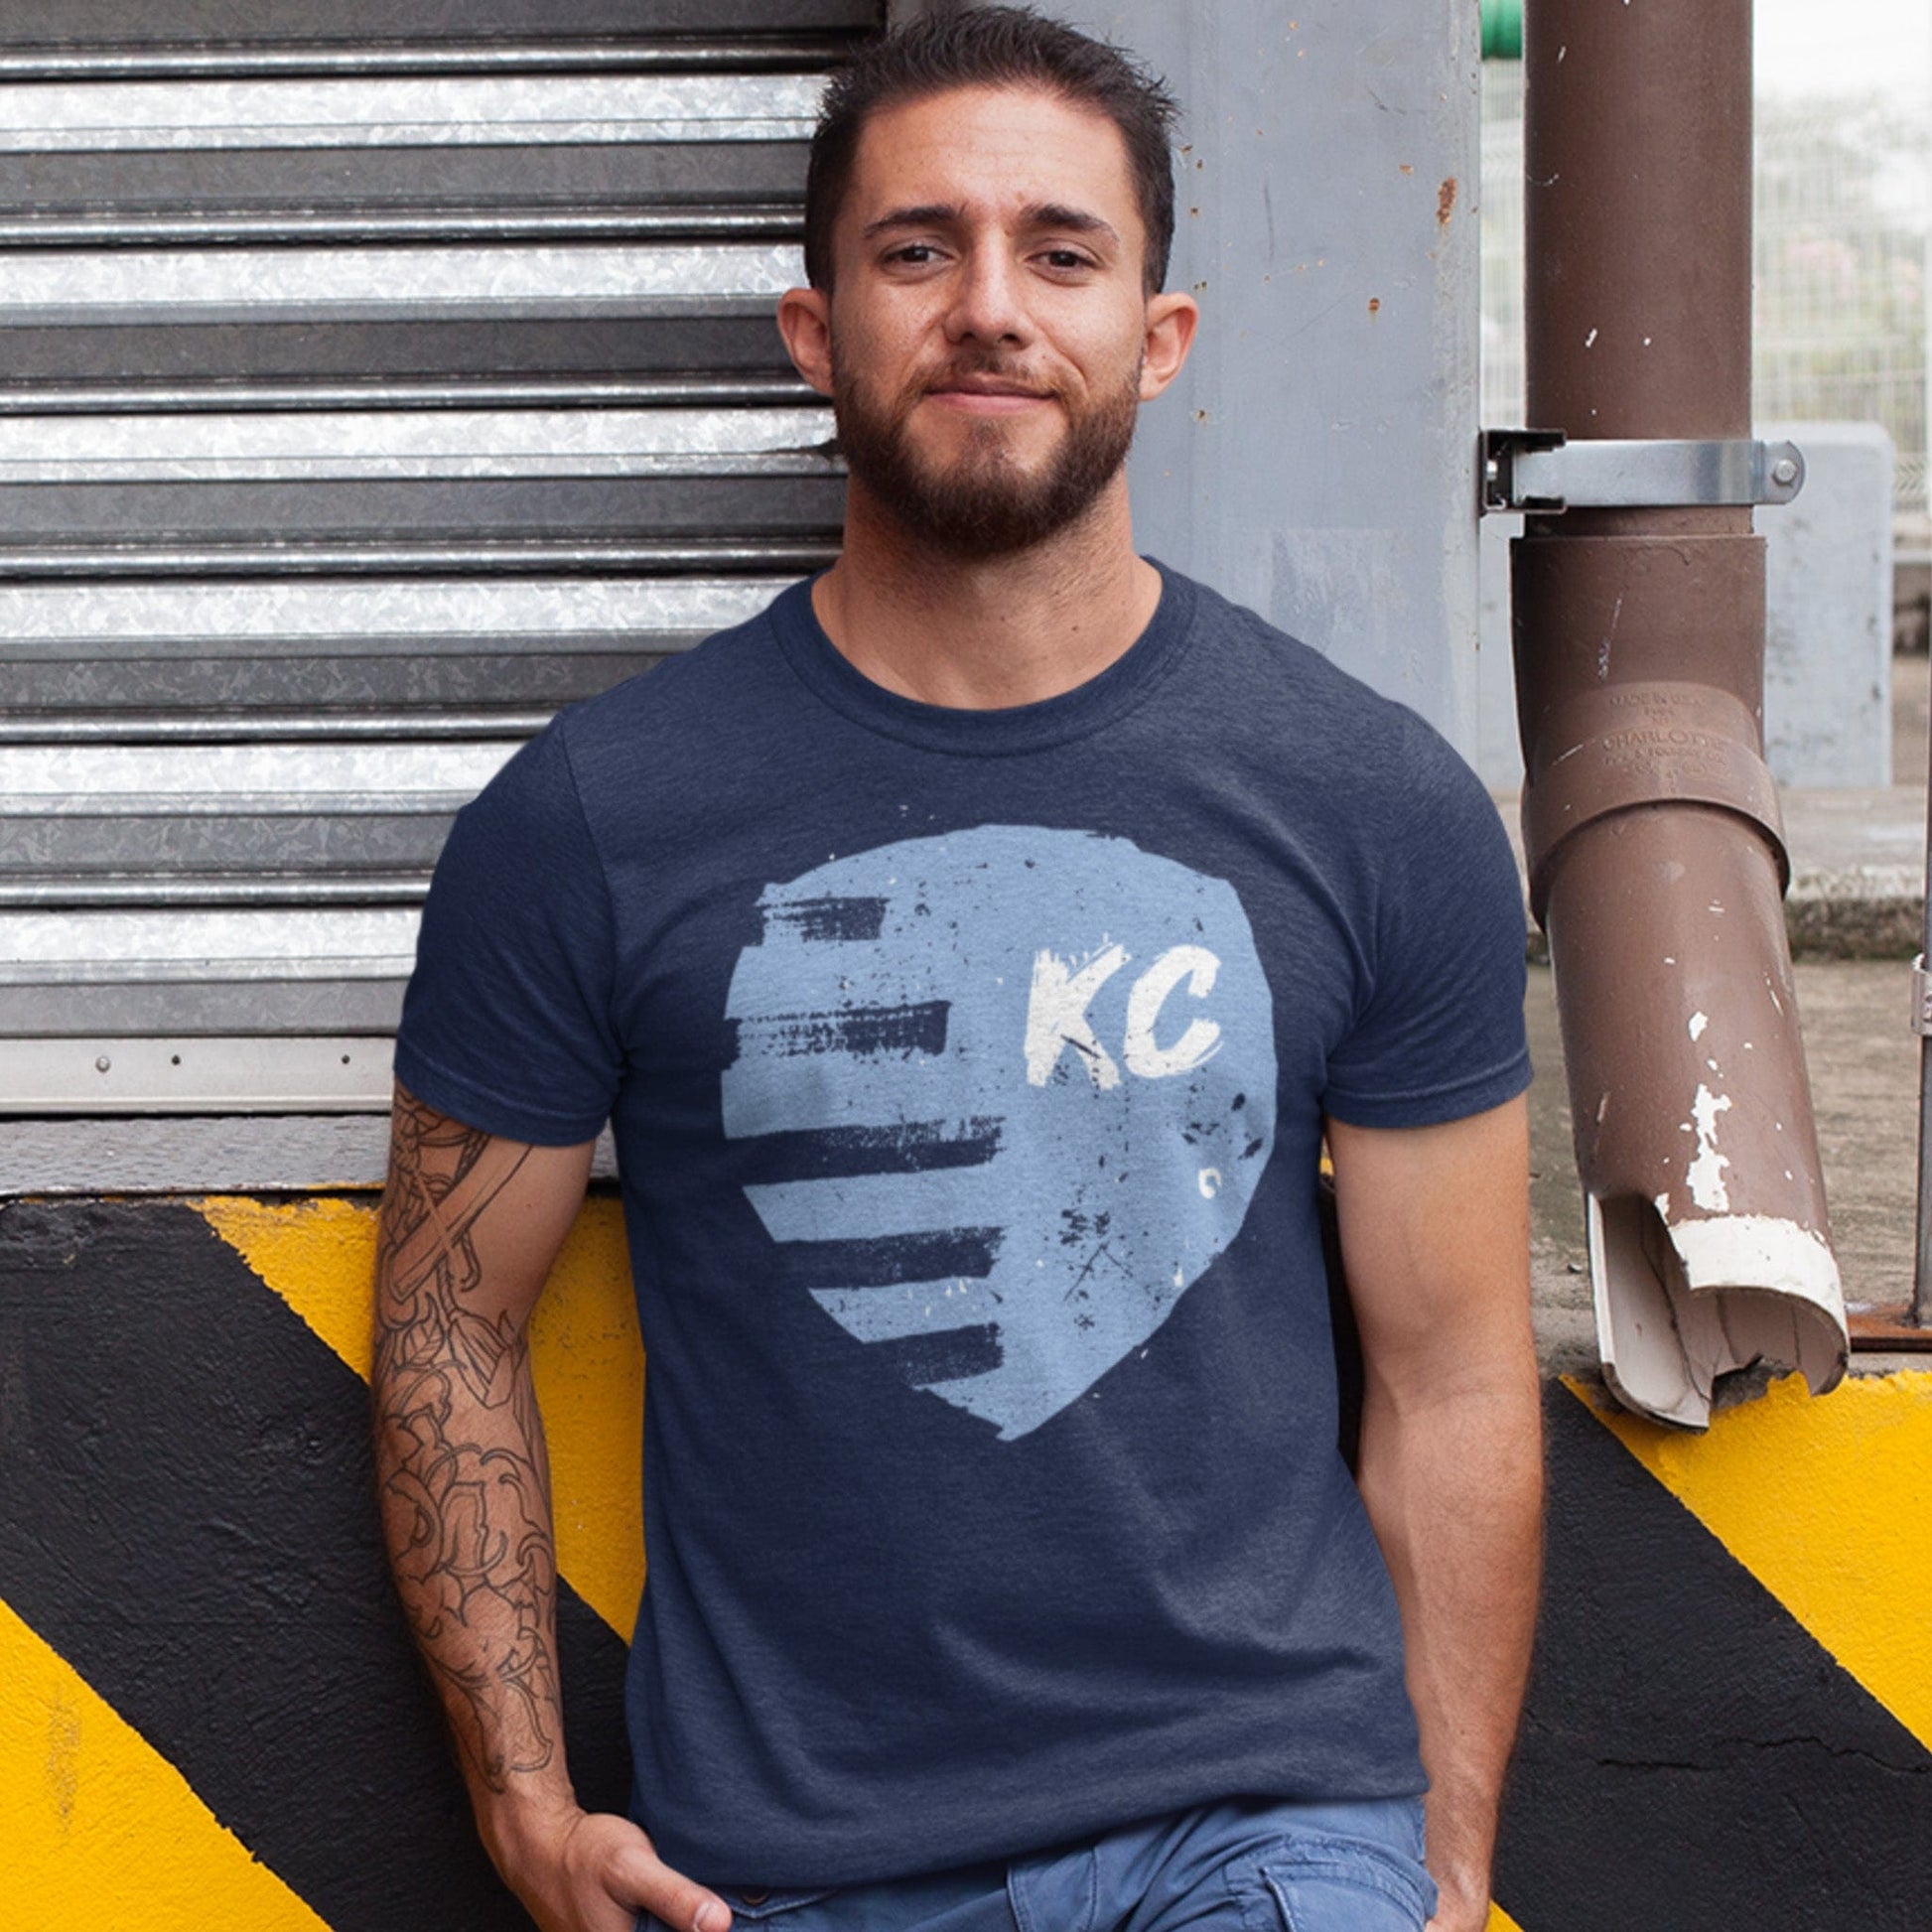 KC Swag Sporting Kansas City navy, powder, white PAINTED SHIELD on heather navy unisex t-shirt worn by male model leaning on loading dock in urban setting